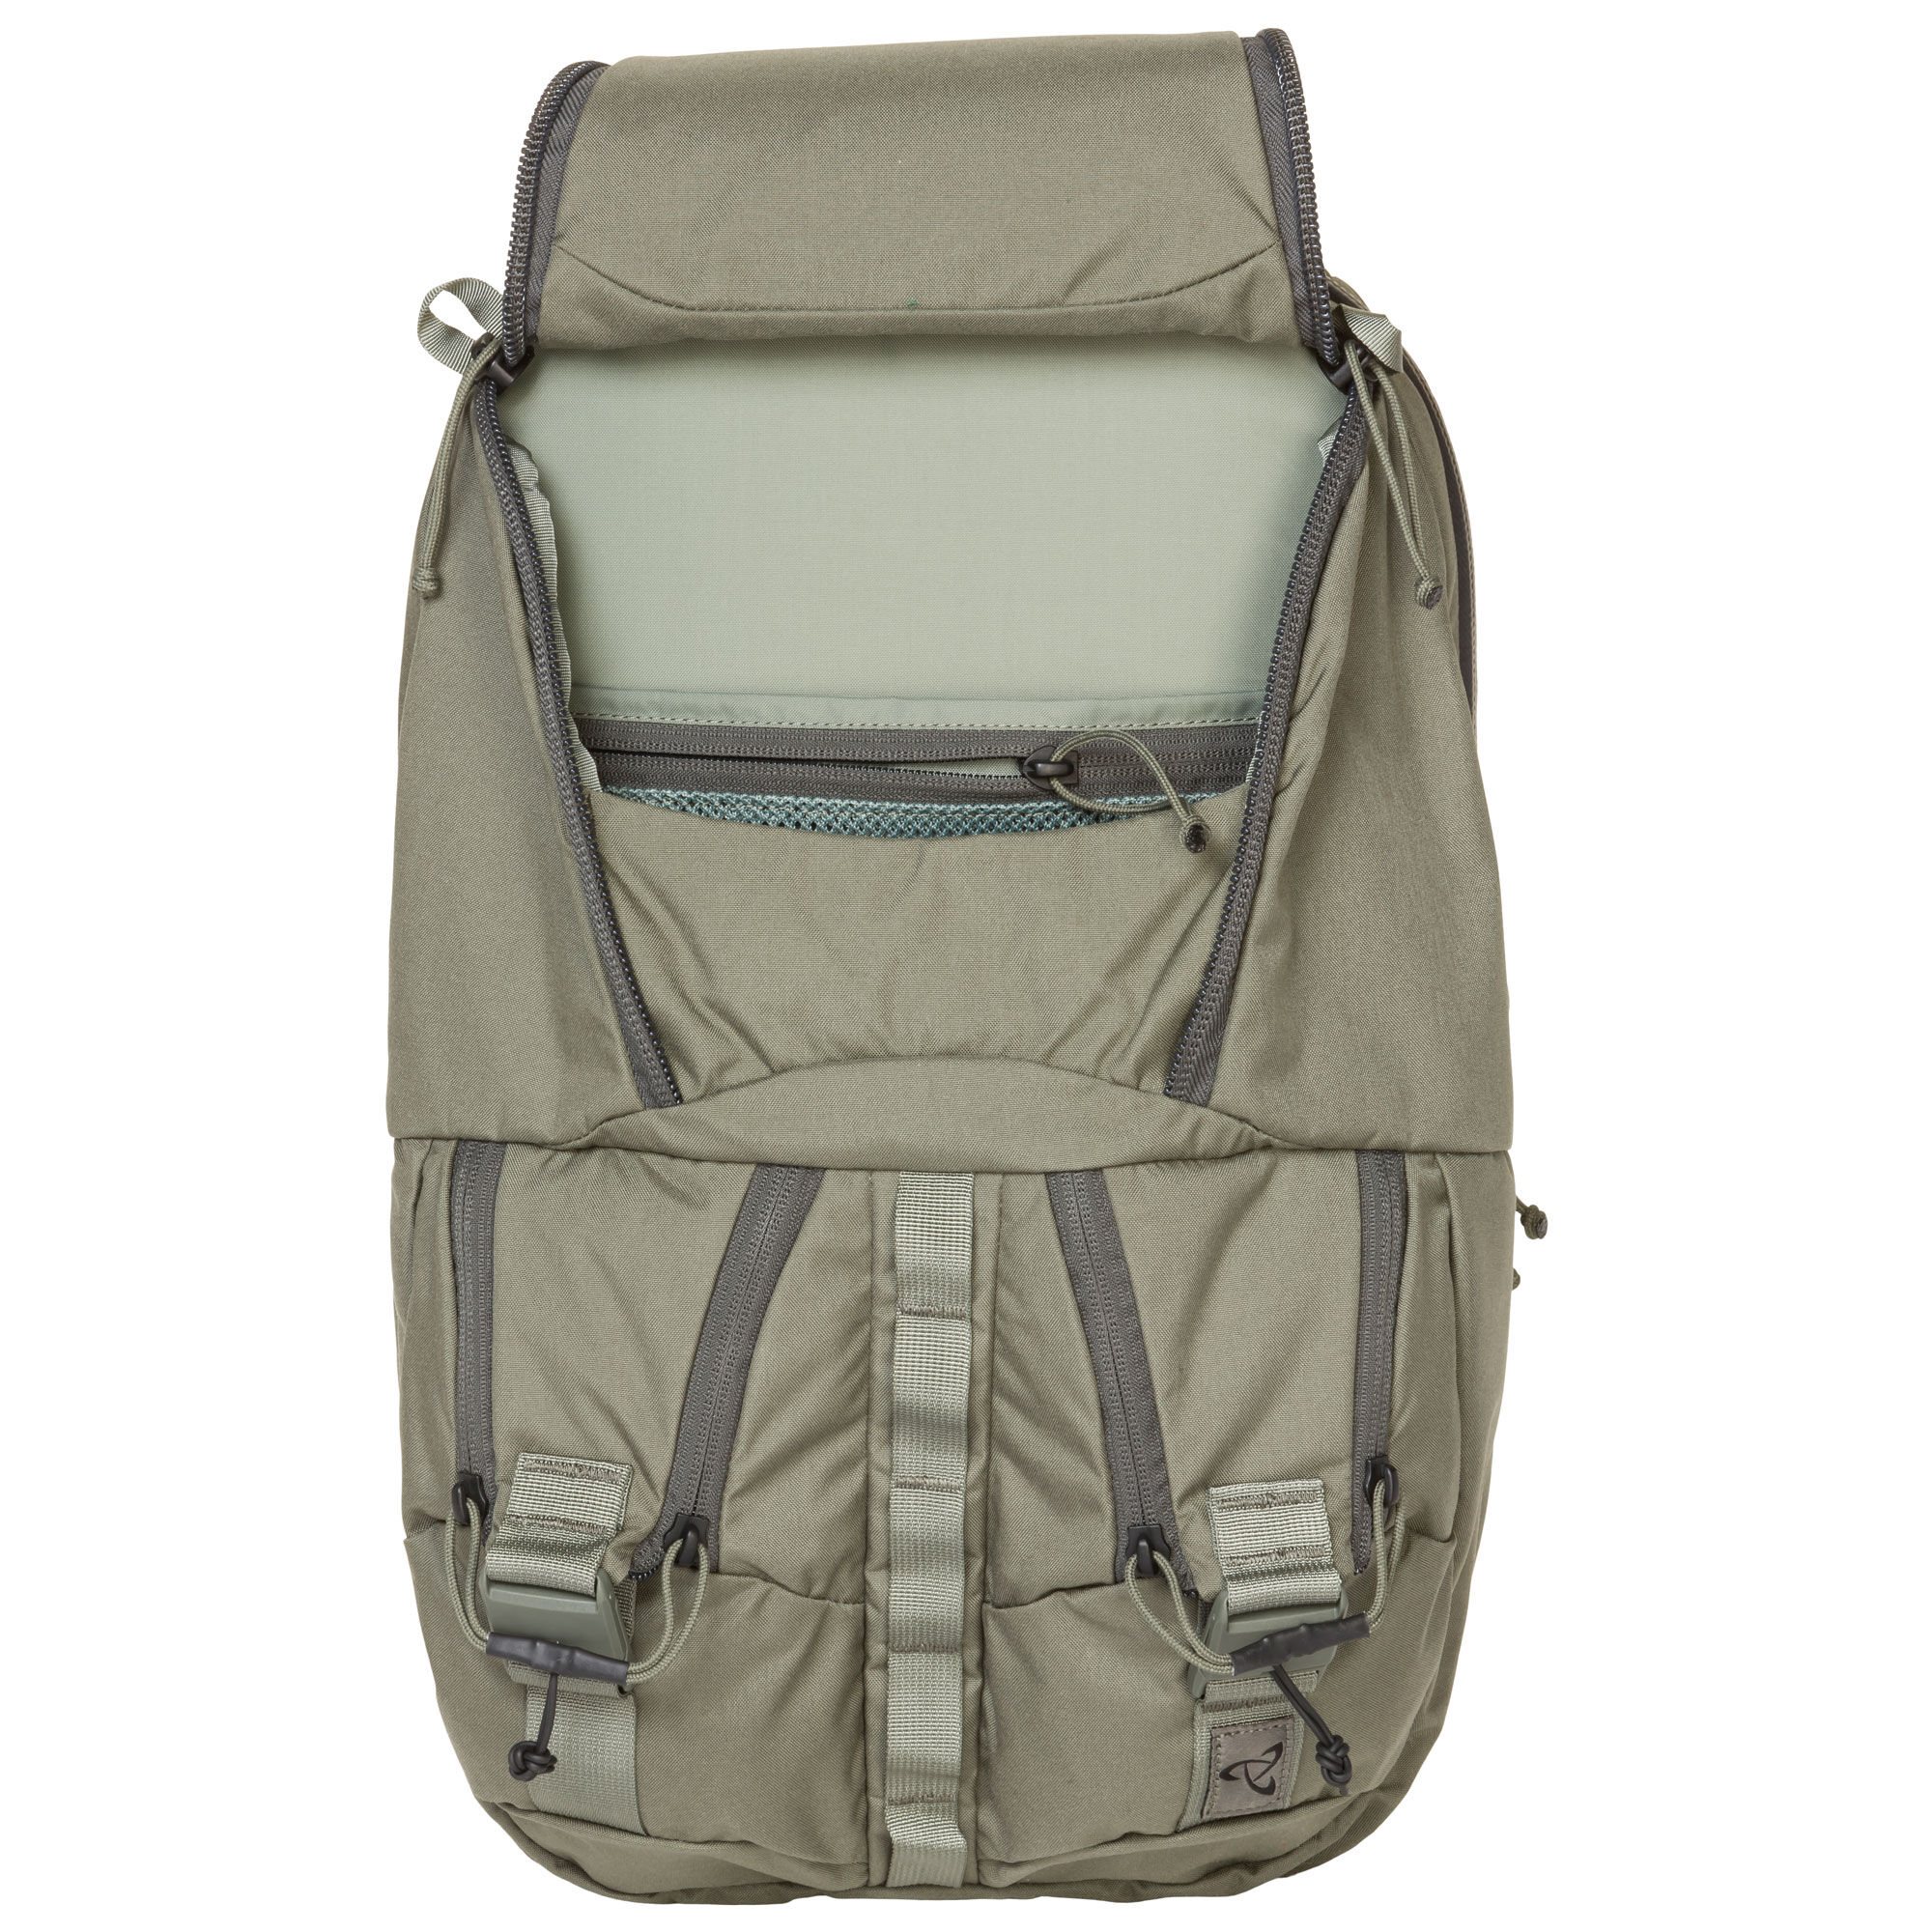 Buy AVENTERA - Camouflage Trekking Bag Hiking Bag RUCK Sack Style -55L,  Ideal Companion for Hikers/Back Packers. Online at Best Prices in India -  JioMart.